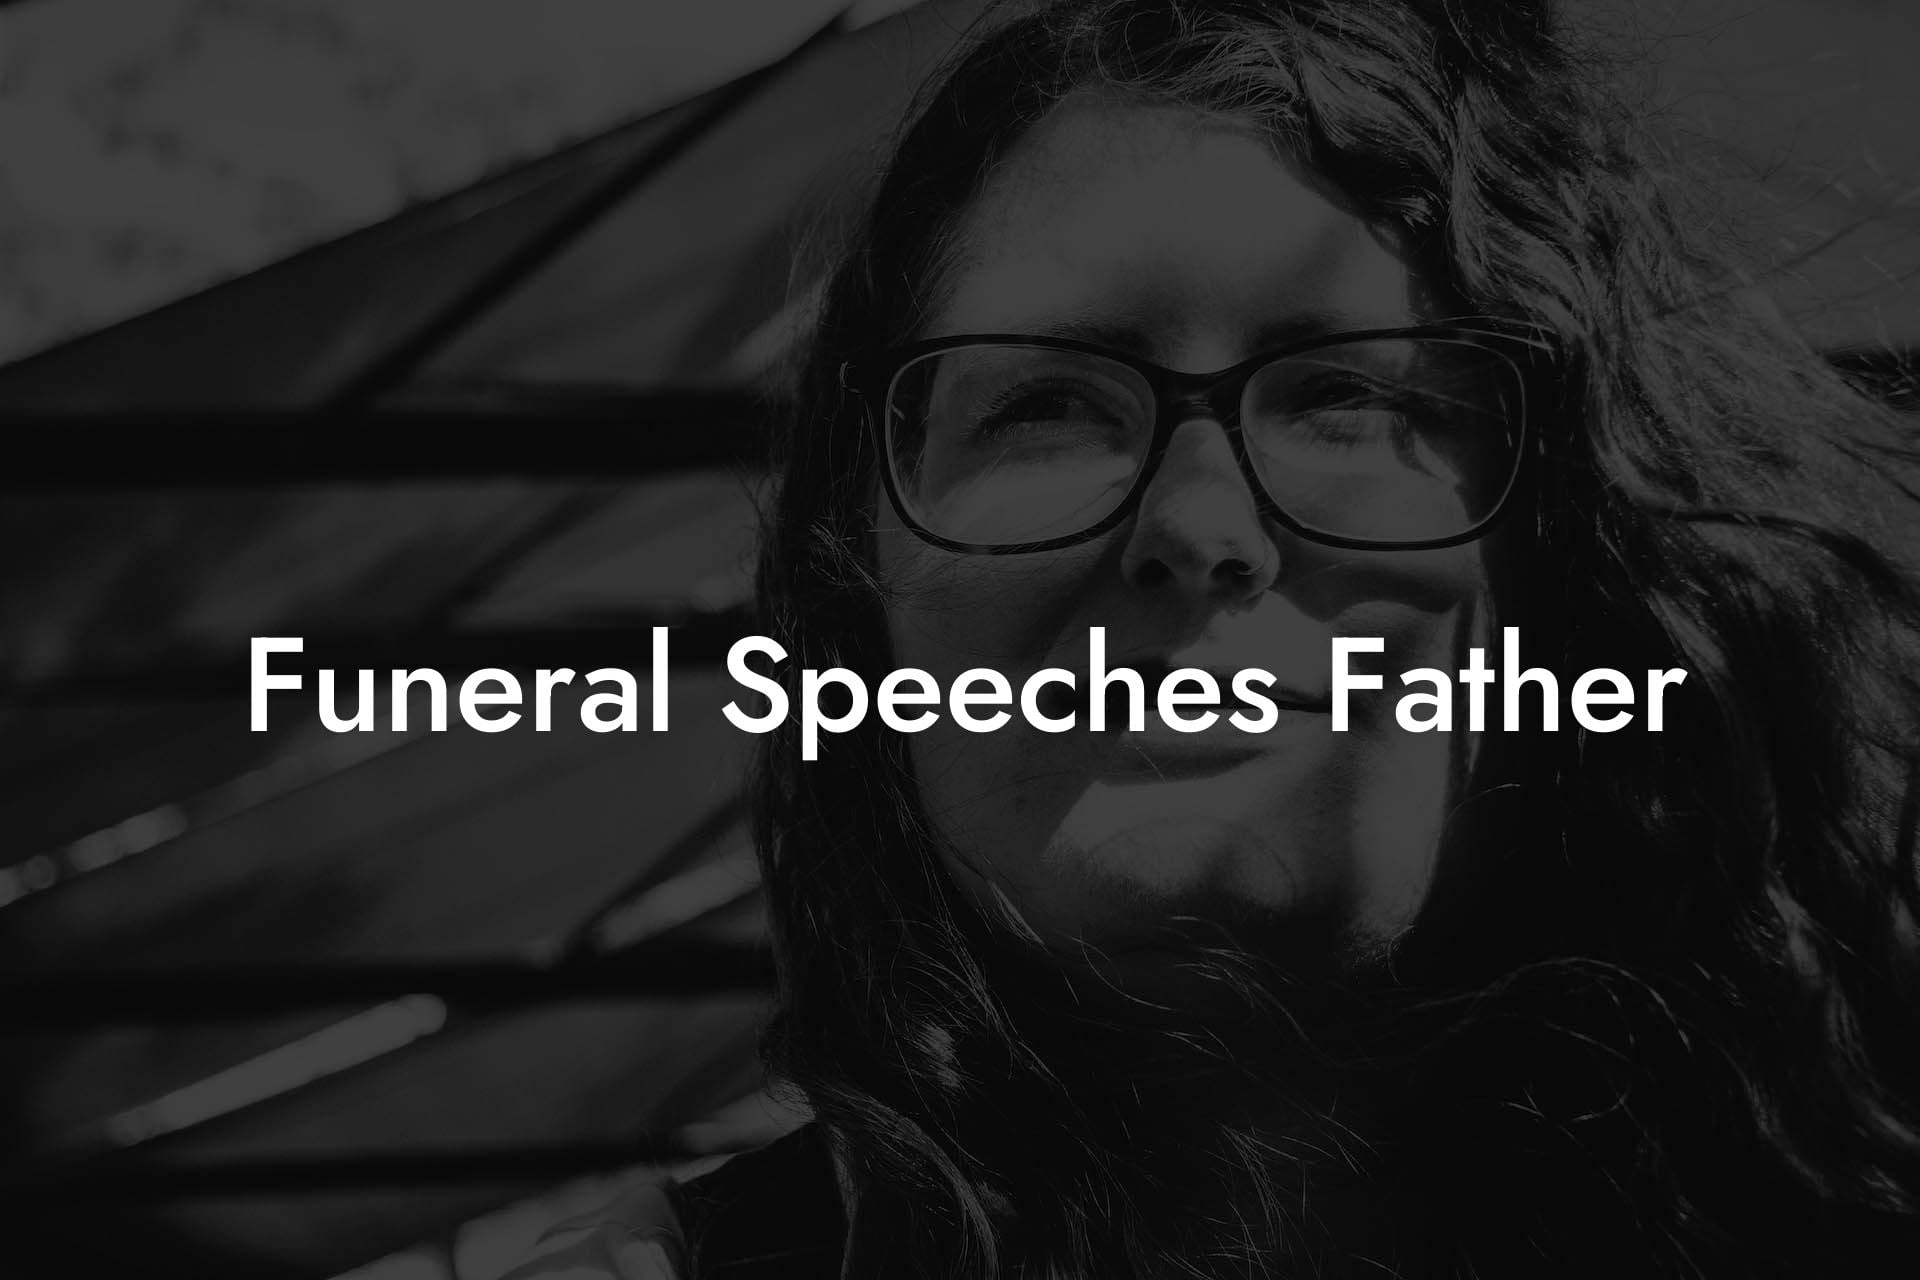 Funeral Speeches Father